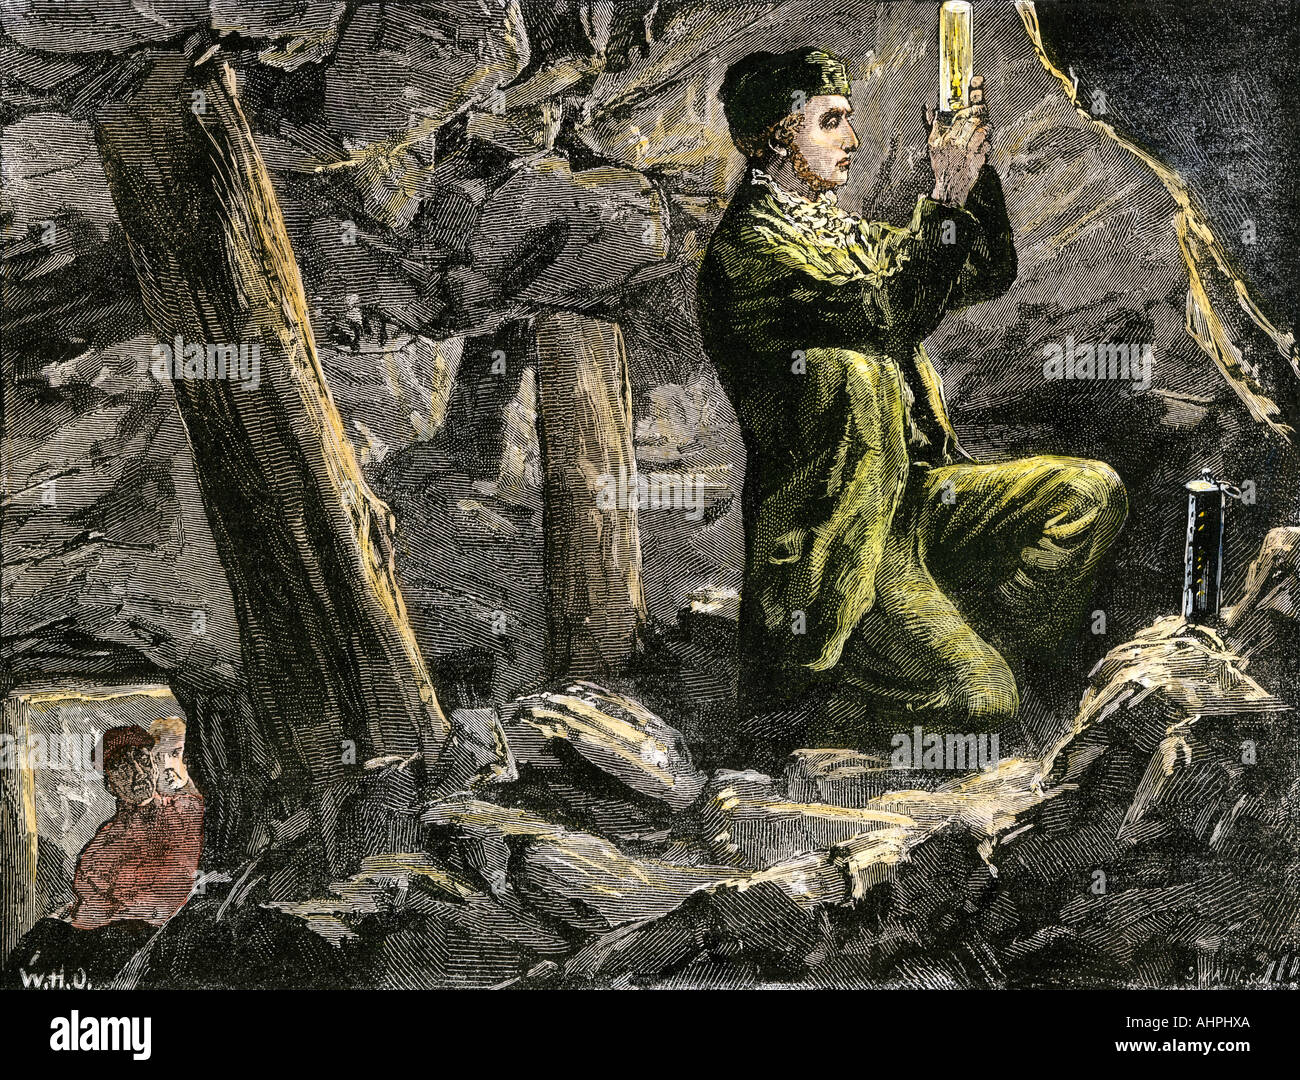 George Stephenson experimenting with his safety lamp in a coal mine England. Hand-colored woodcut Stock Photo